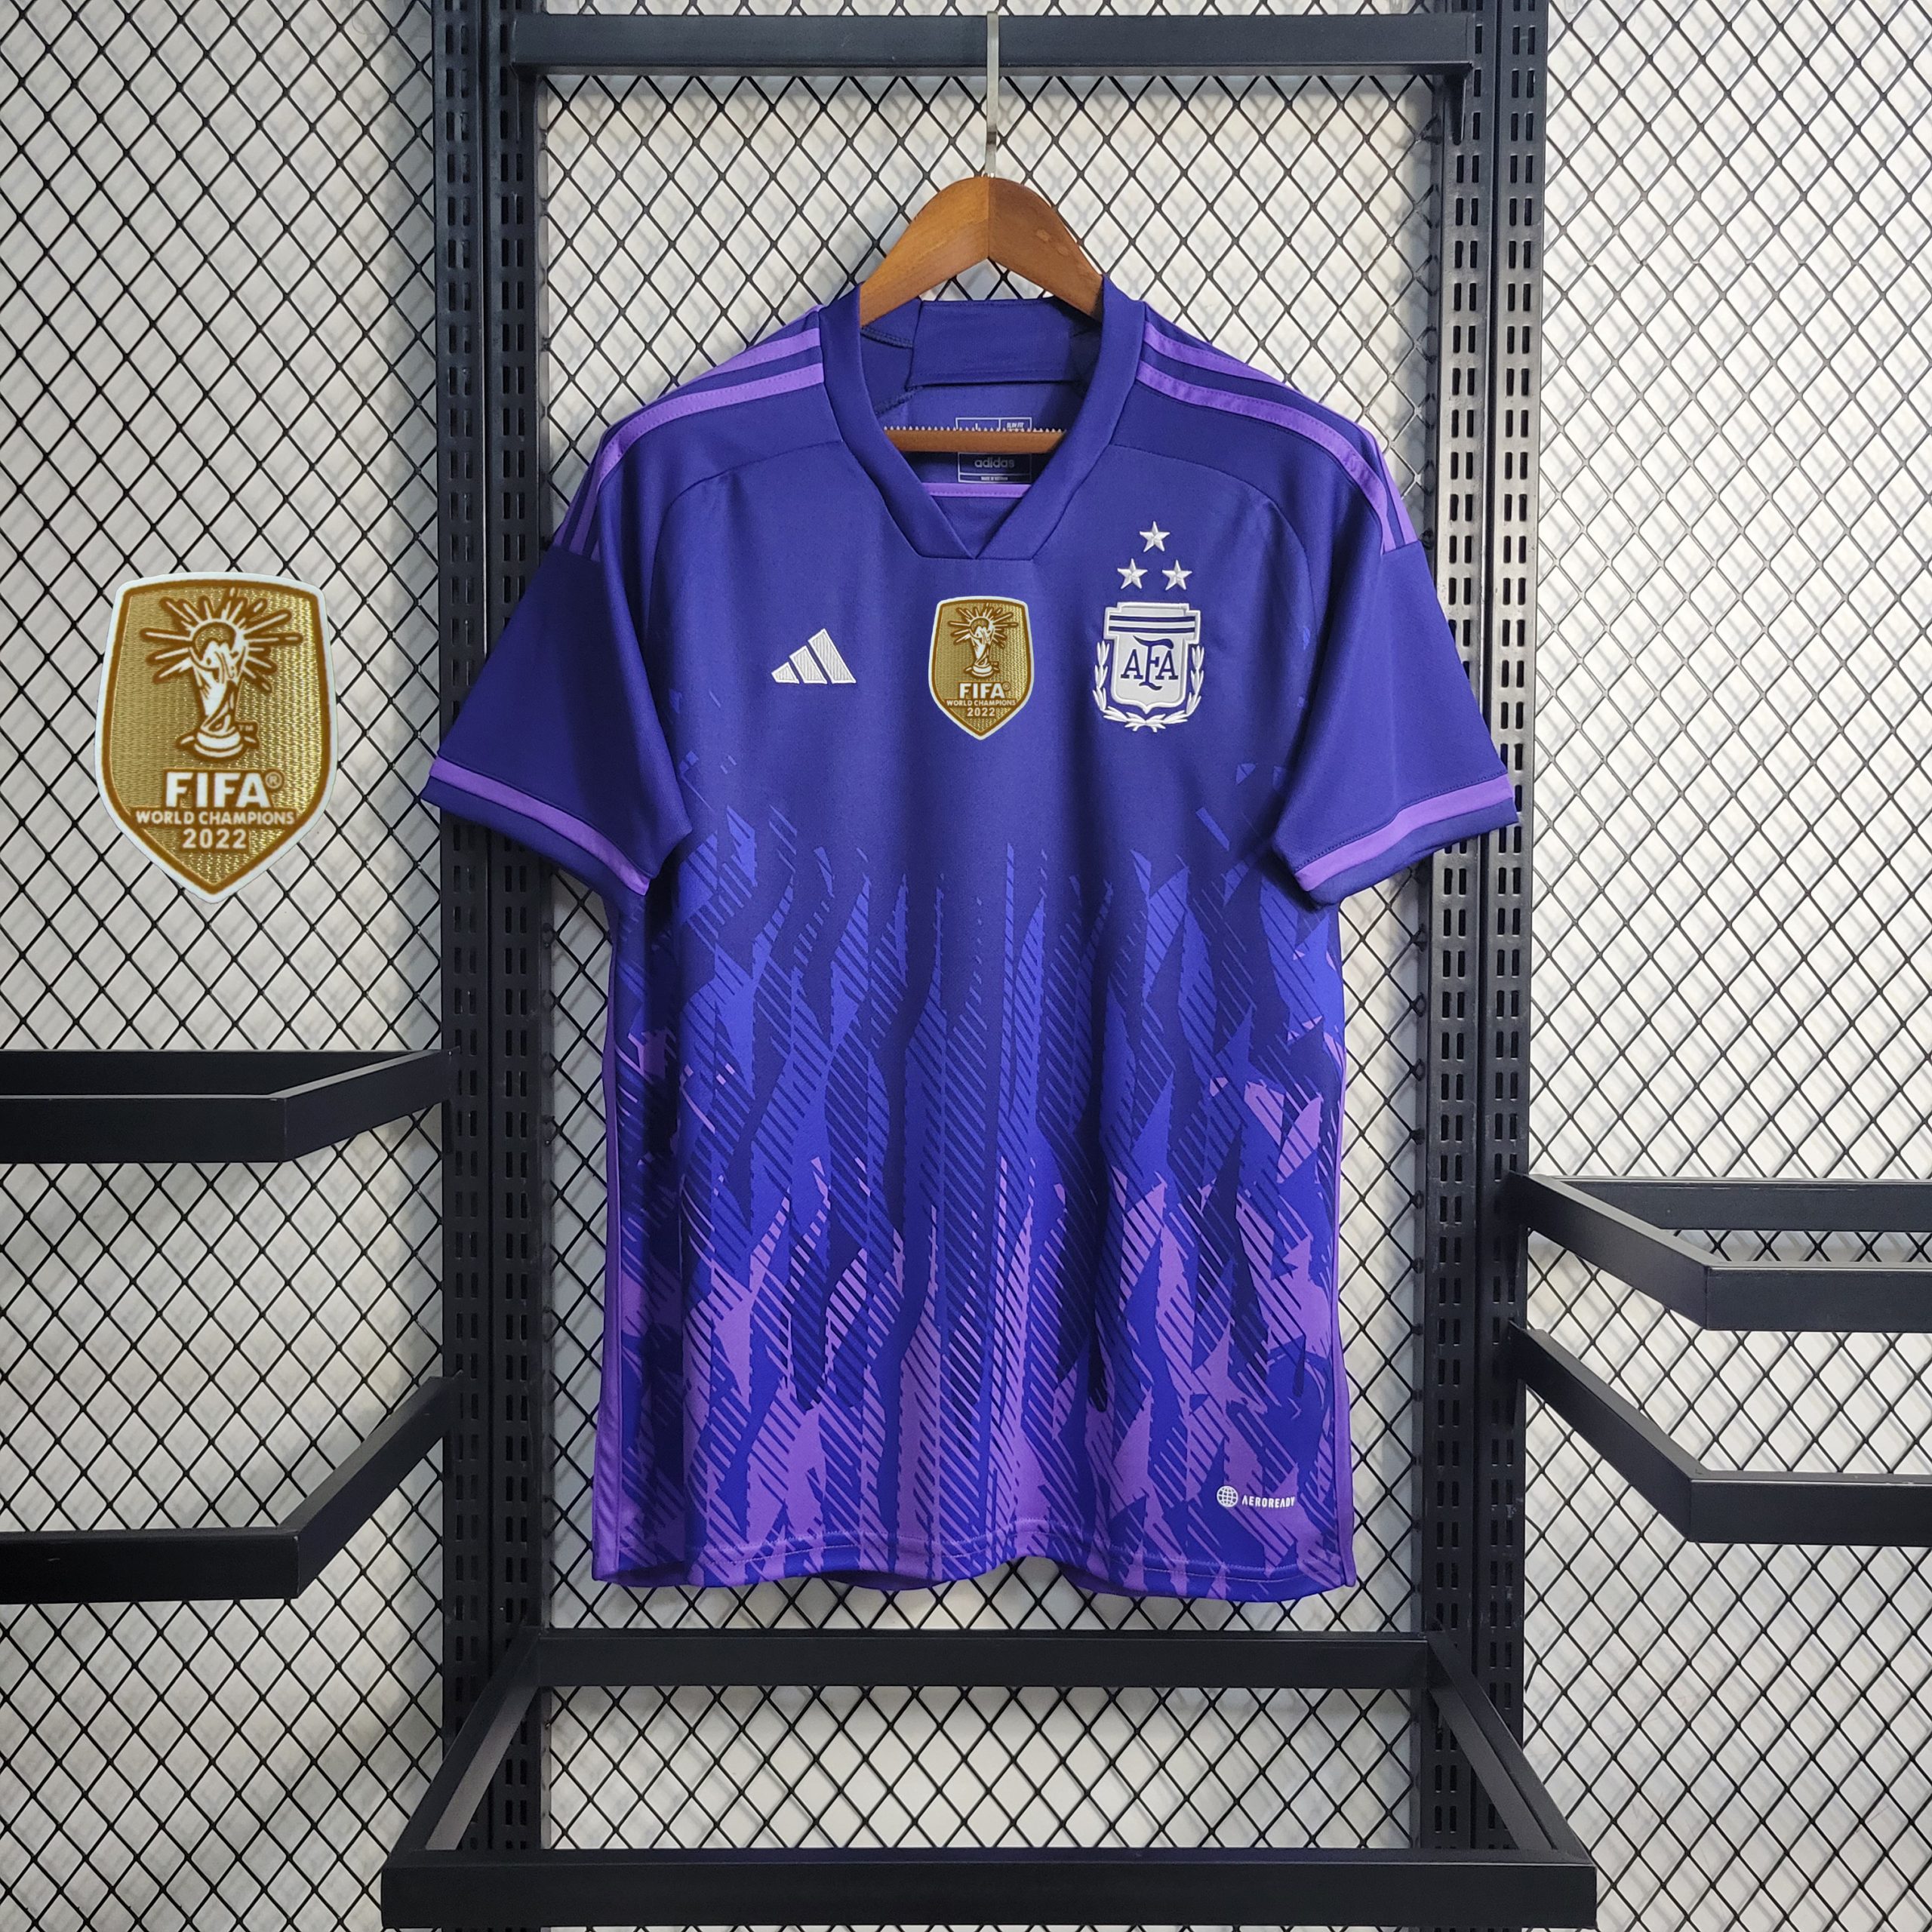 Argentina PLAYER VERSION WC Home 3 Star Jersey With FIFA Champions Bad